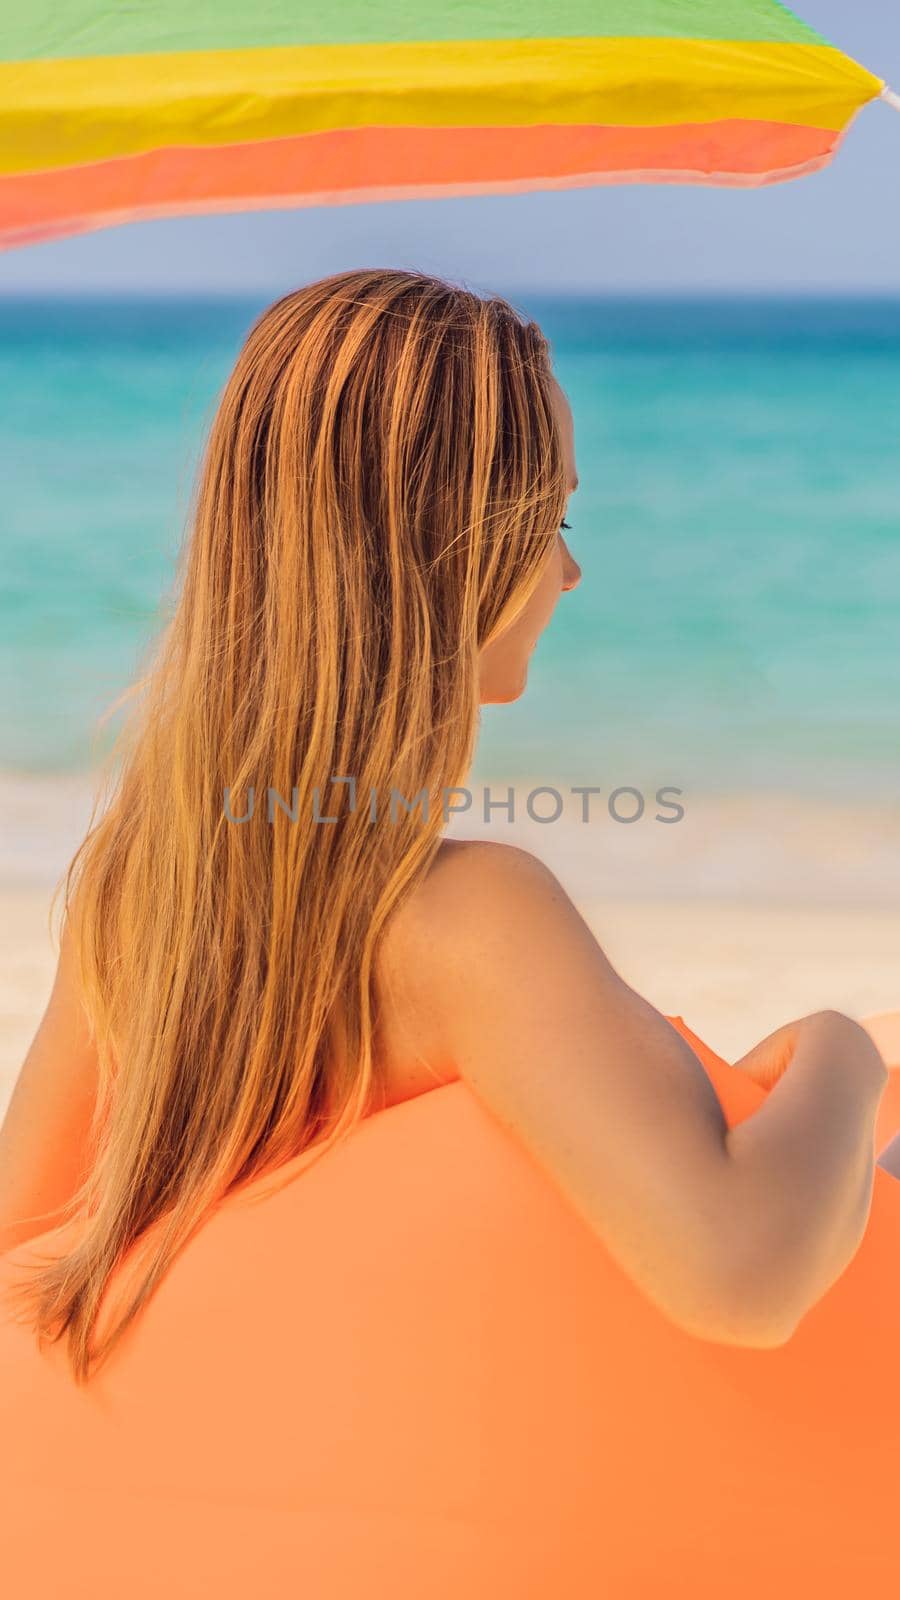 Summer lifestyle portrait of pretty girl sitting on the orange inflatable sofa on the beach of tropical island. Relaxing and enjoying life on air bed. VERTICAL FORMAT for Instagram mobile story or stories size. Mobile wallpaper